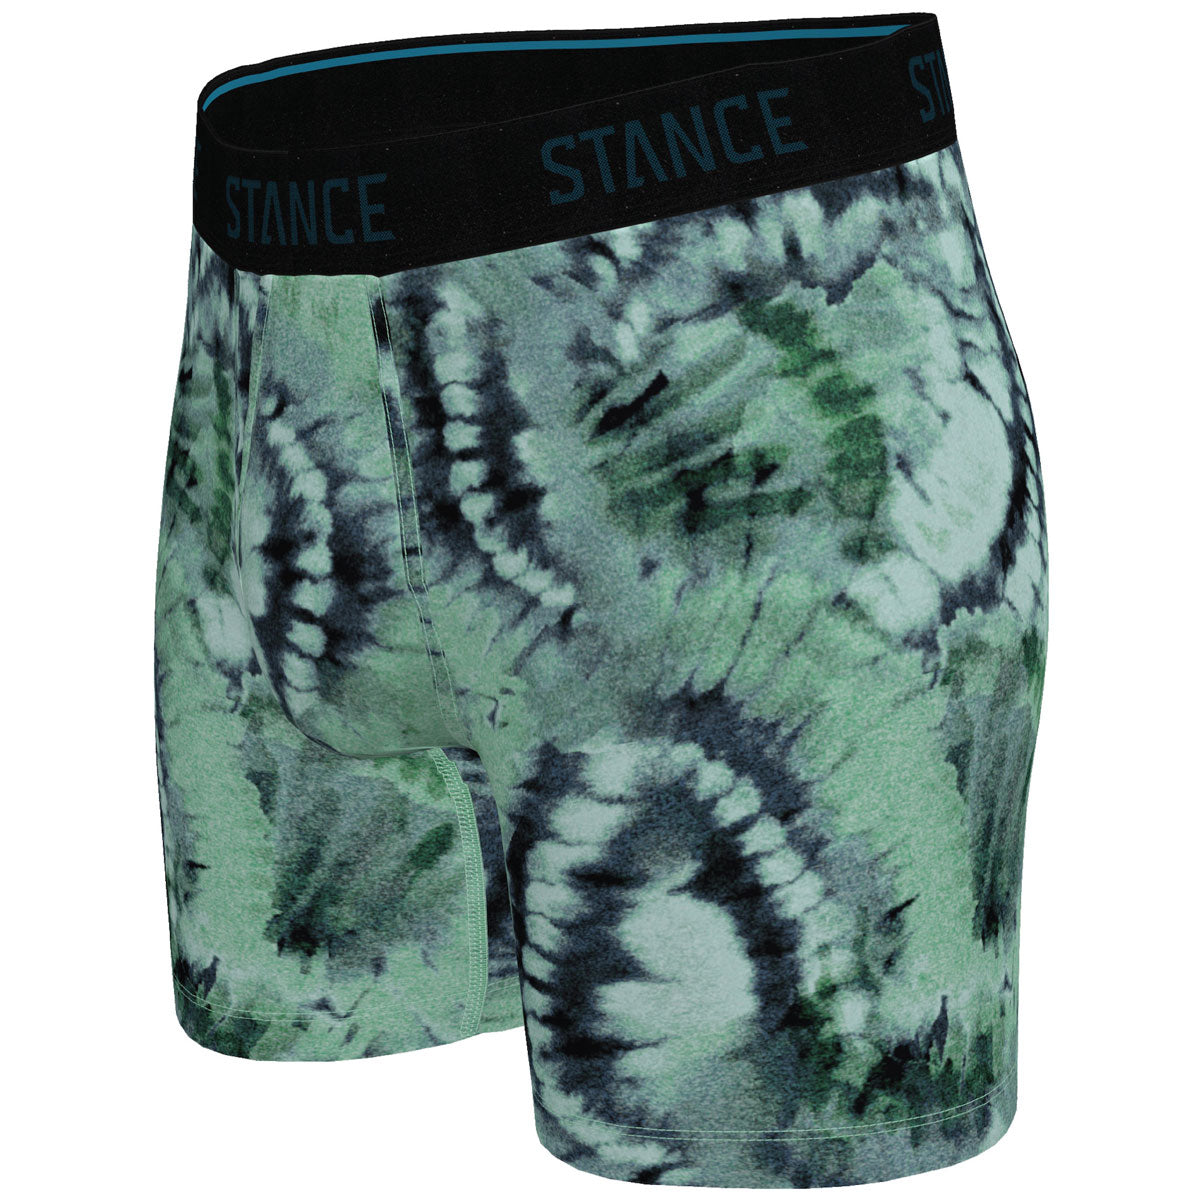 Stance Micro Dye Wholester Boxer Brief - Jade image 1